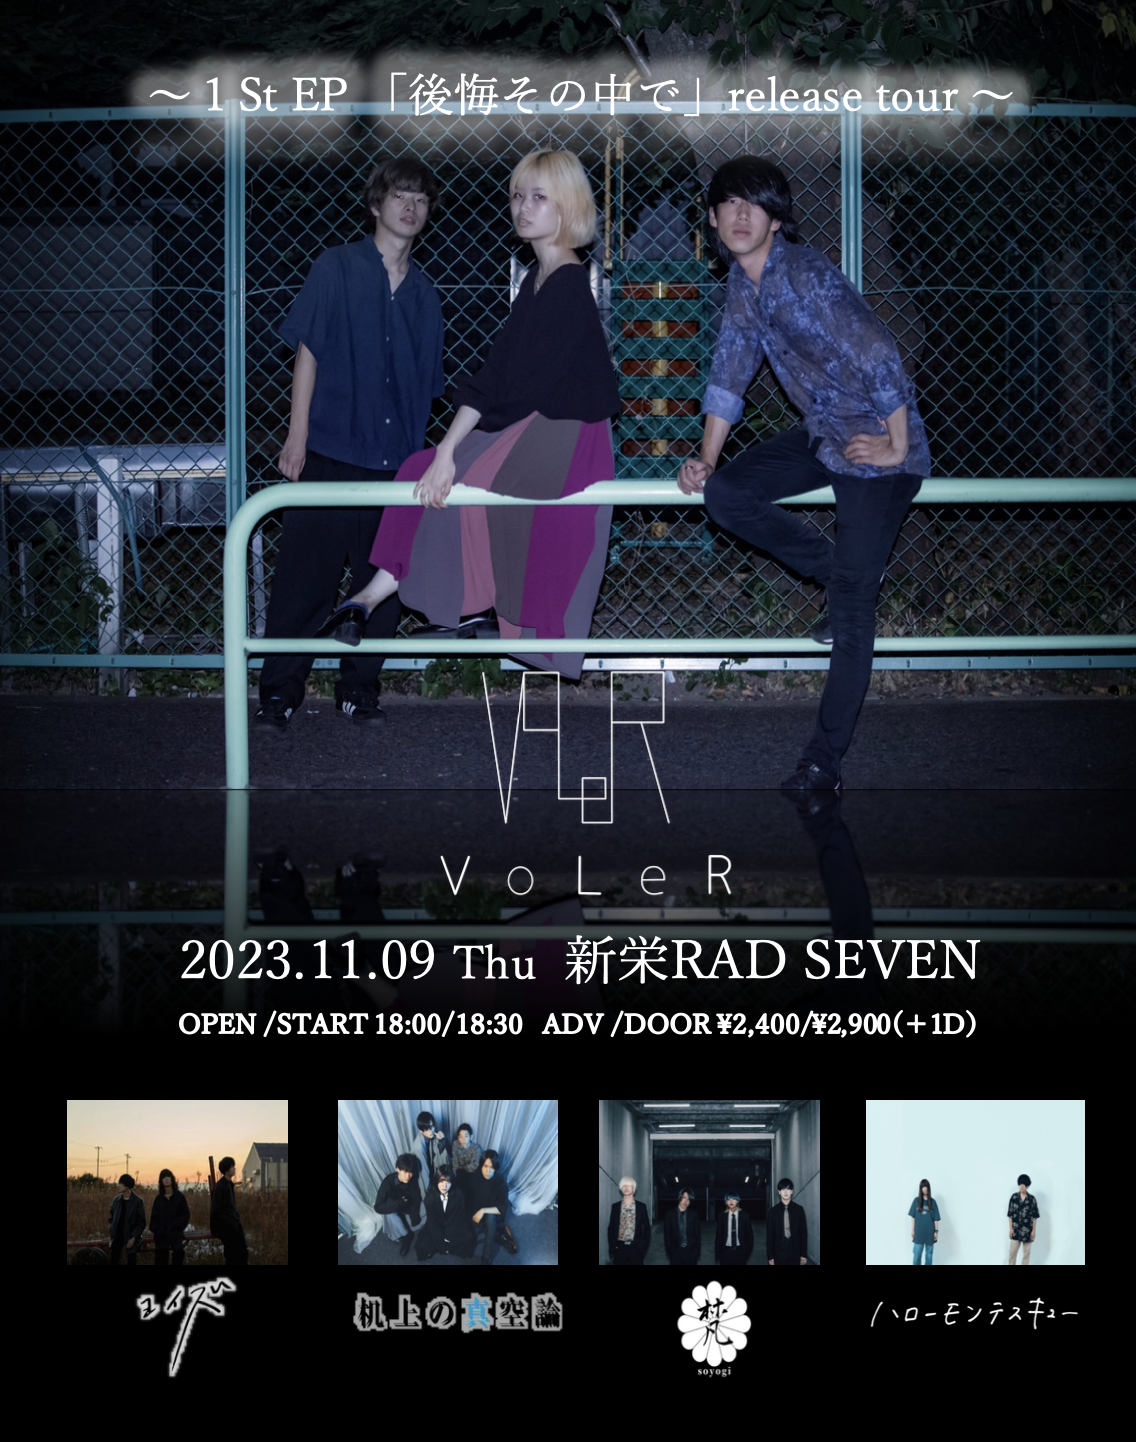 VoLeR 1st EP Release Tour 後悔その中で